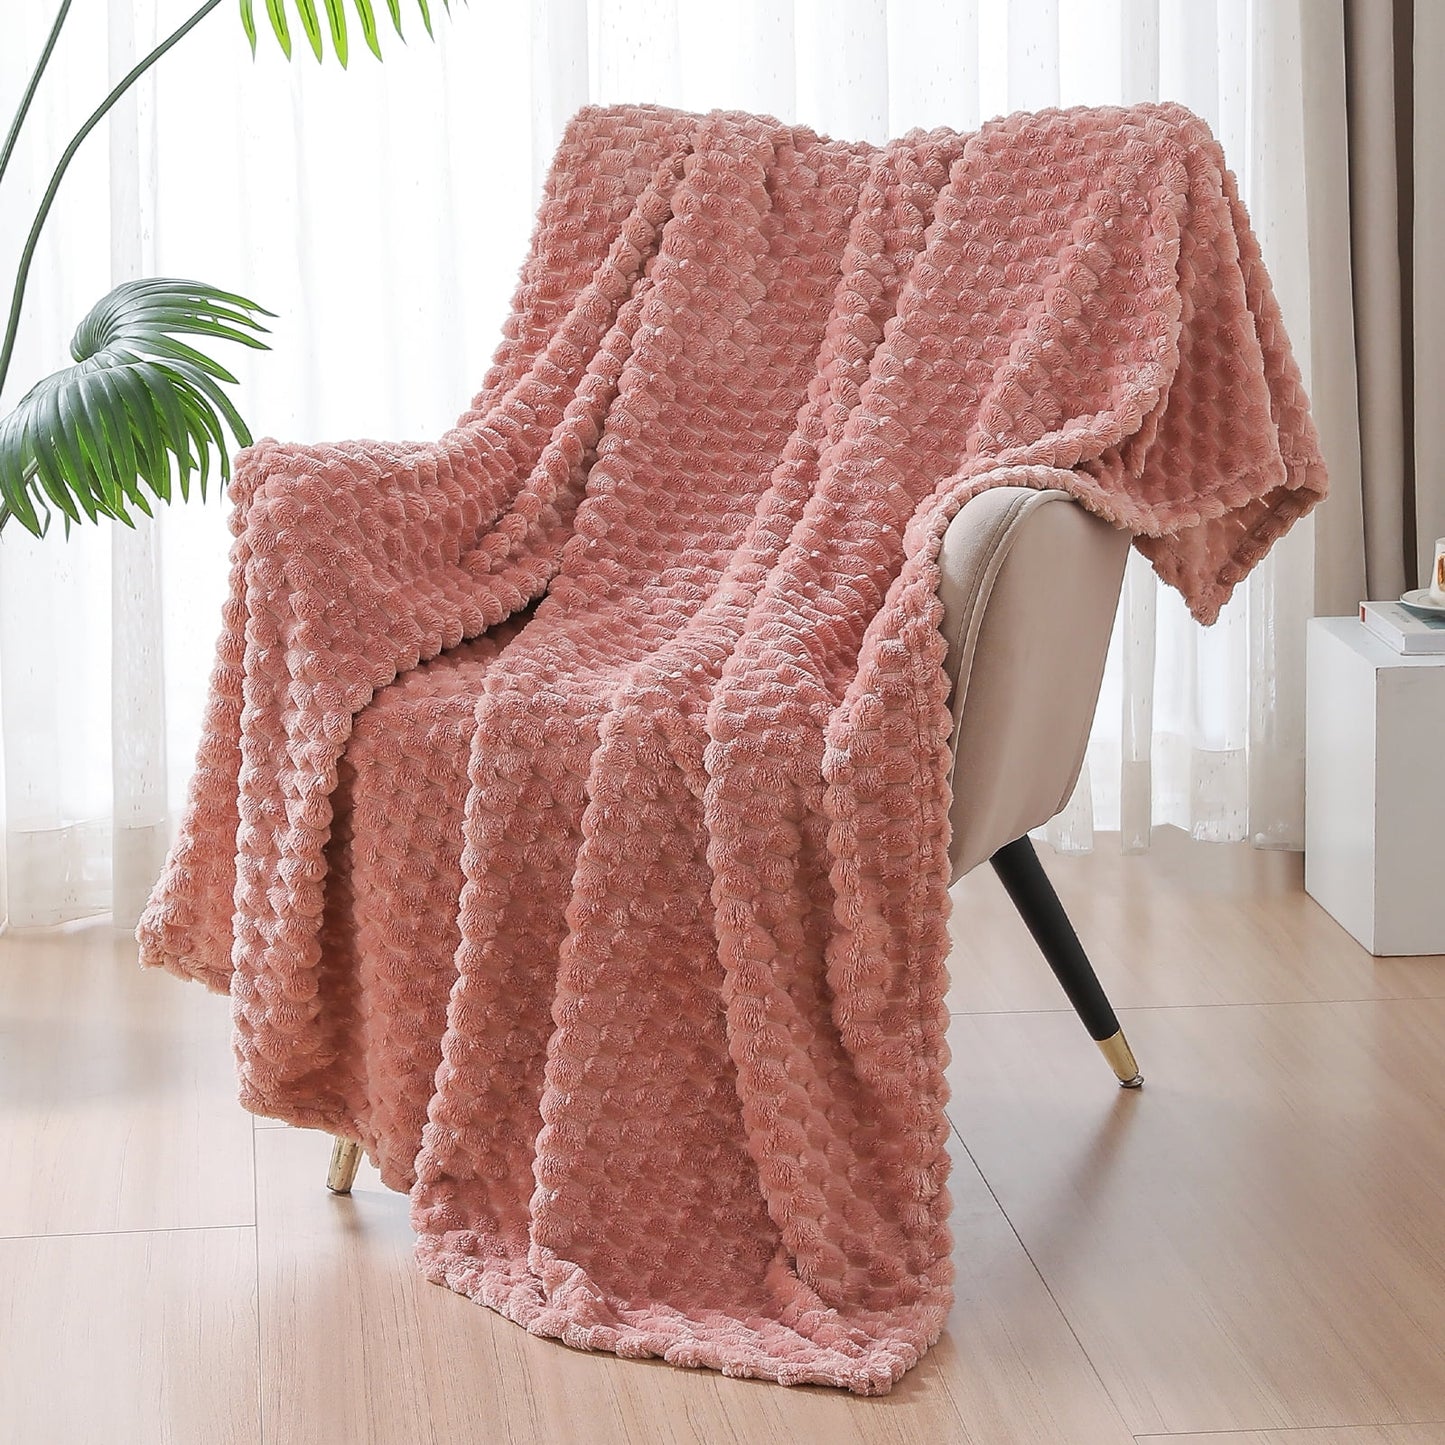 Exclusivo Mezcla Large Soft Fleece Throw Blanket, 50x70 Inches Stylish Jacquard Throw Blanket for Couch, Cozy, Warm, Lightweight and Decorative Dusty Pink Blanket